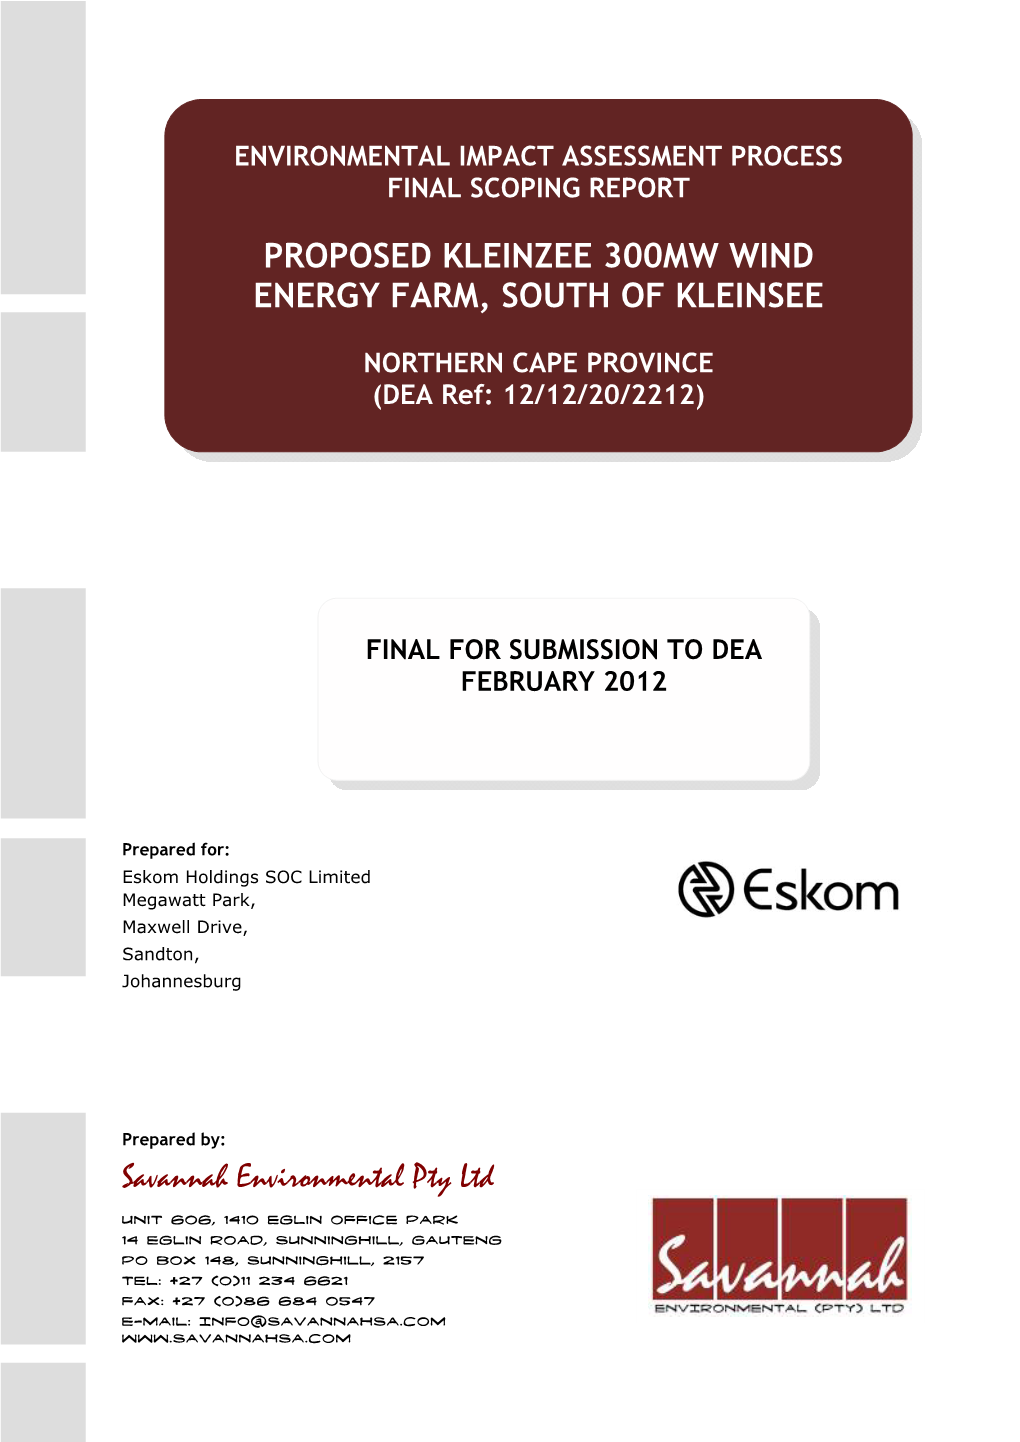 Proposed Kleinzee 300Mw Wind Energy Farm, South of Kleinsee